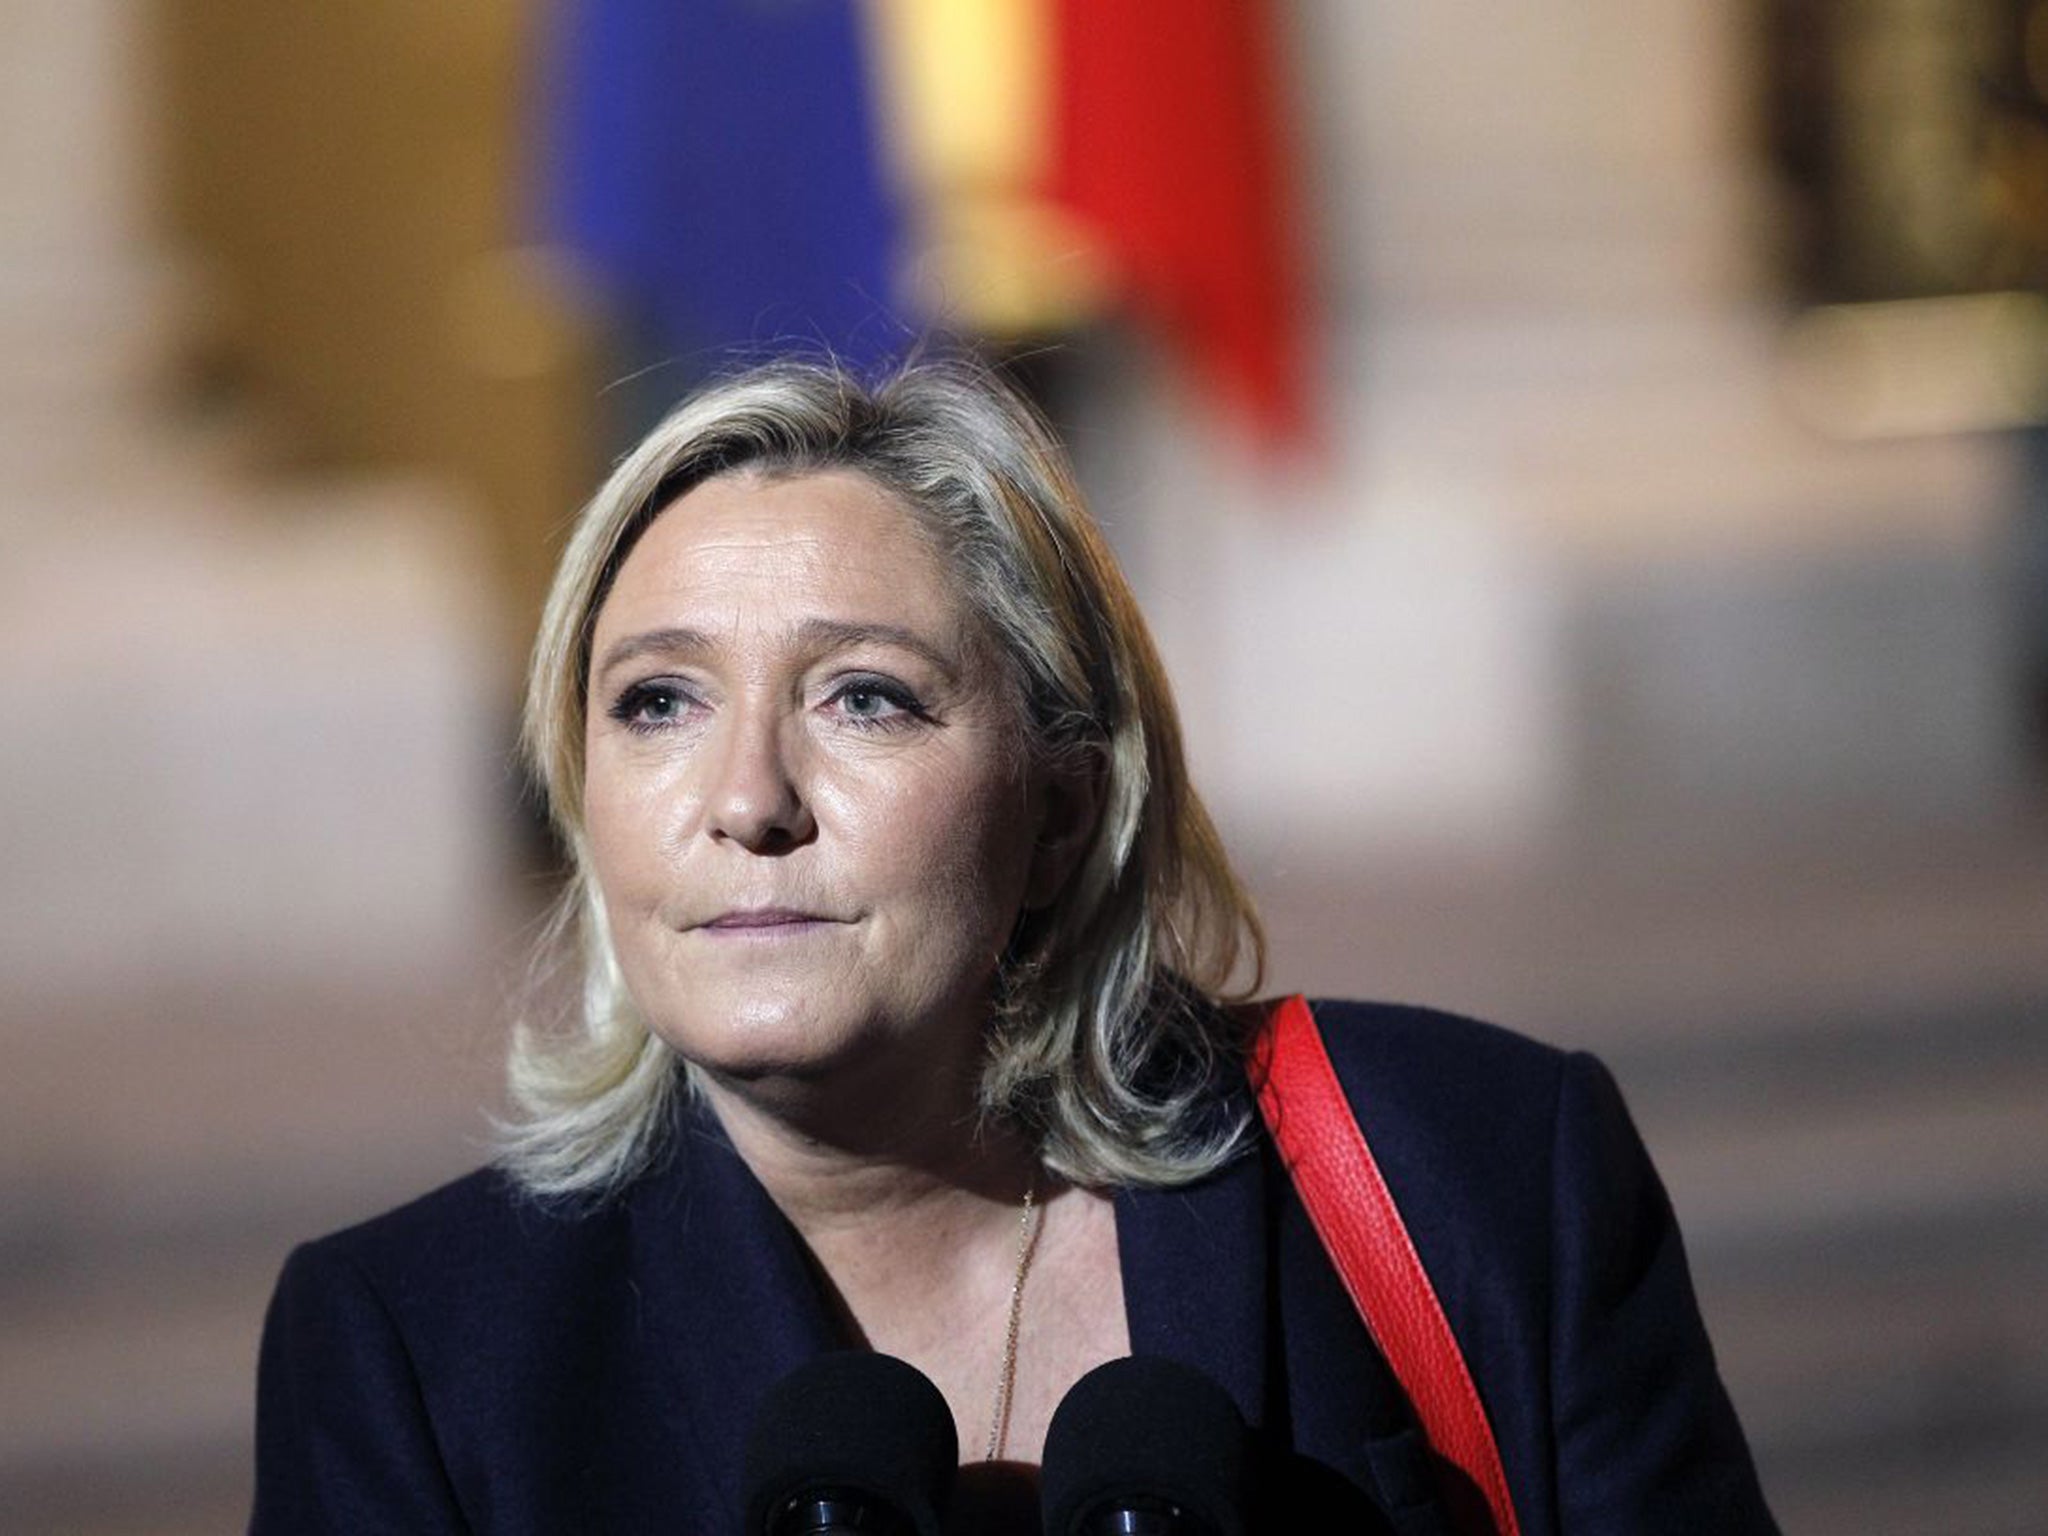 Marine Le Pen is leading the opinion polls with 30% of voting intentions in the first round of France's regional elections